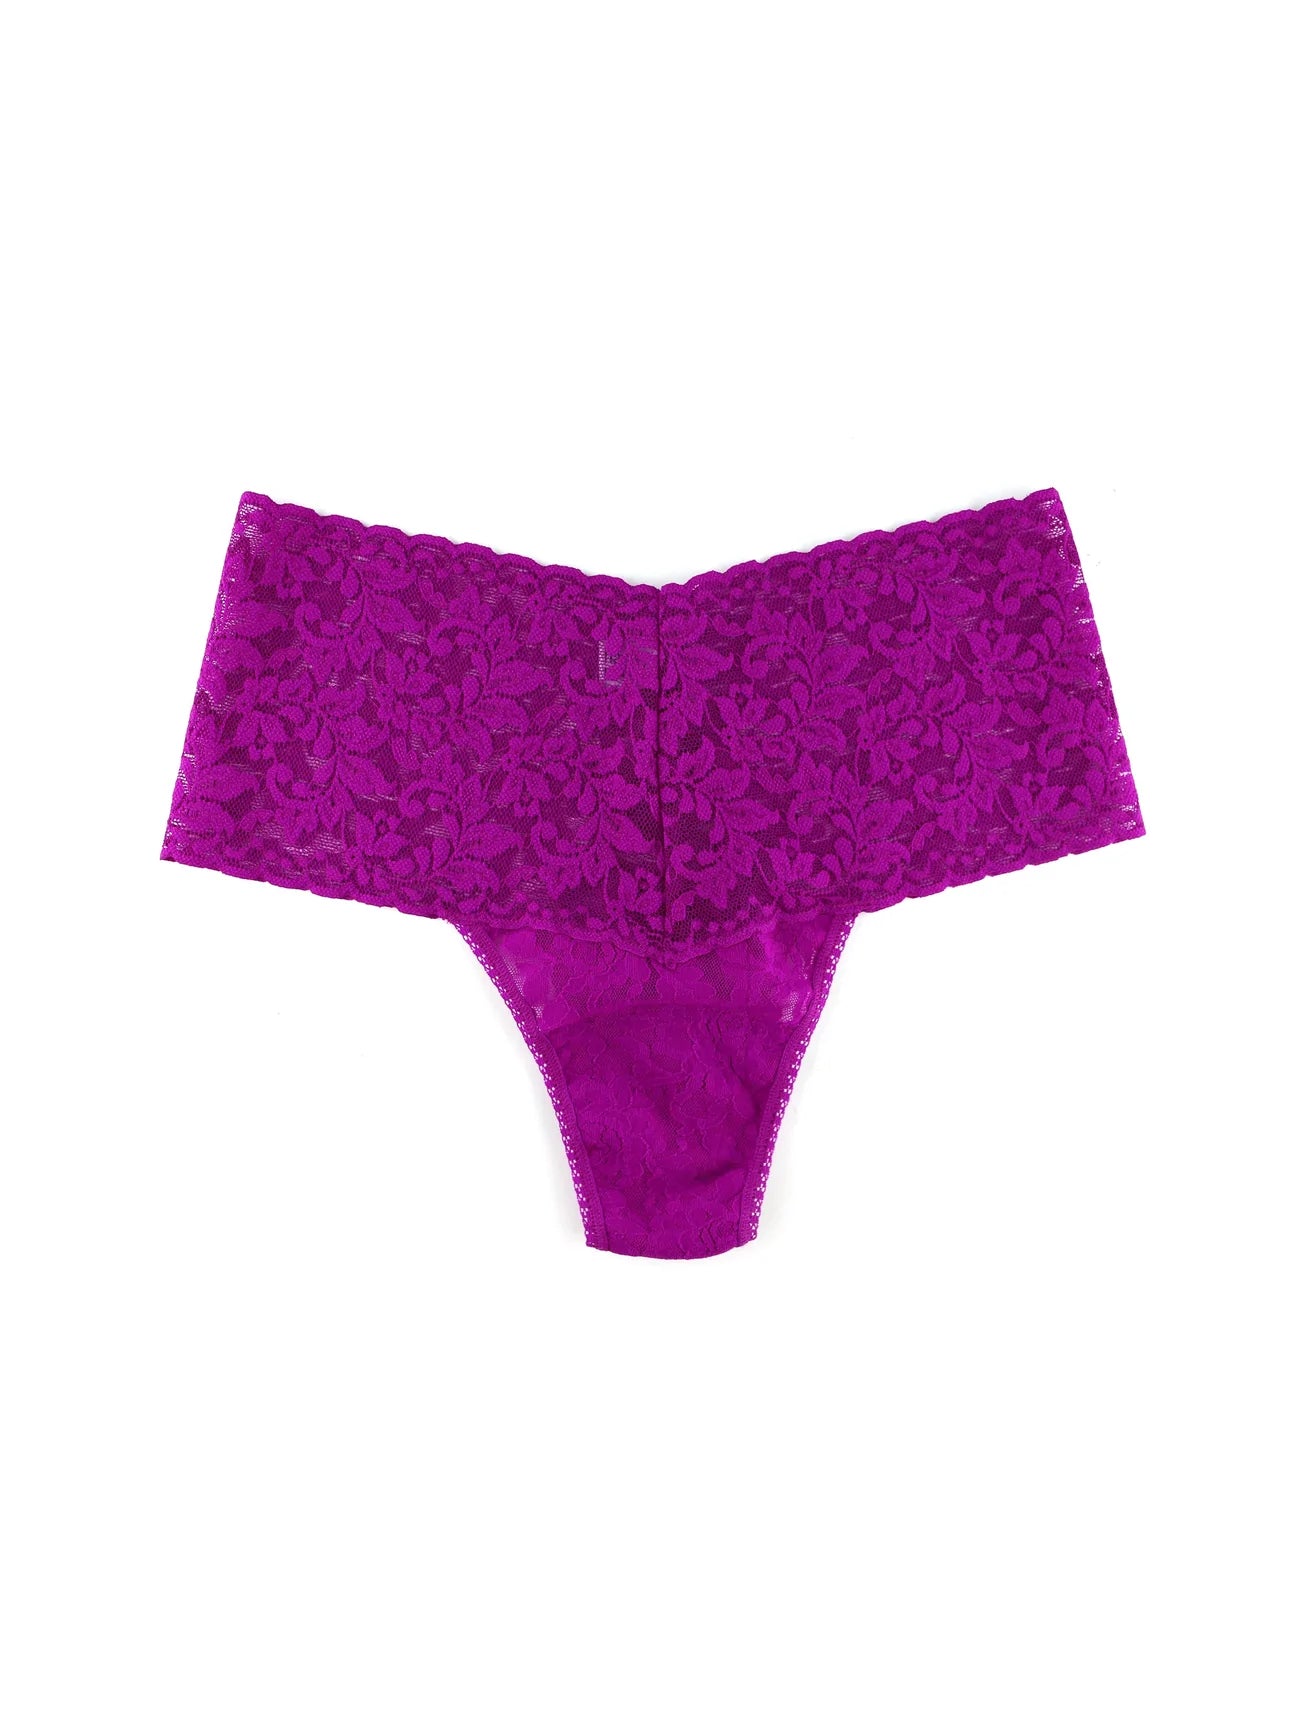 Plus Size Retro Signature Lace Thong In Countess Pink - Hanky Panky –  BraTopia